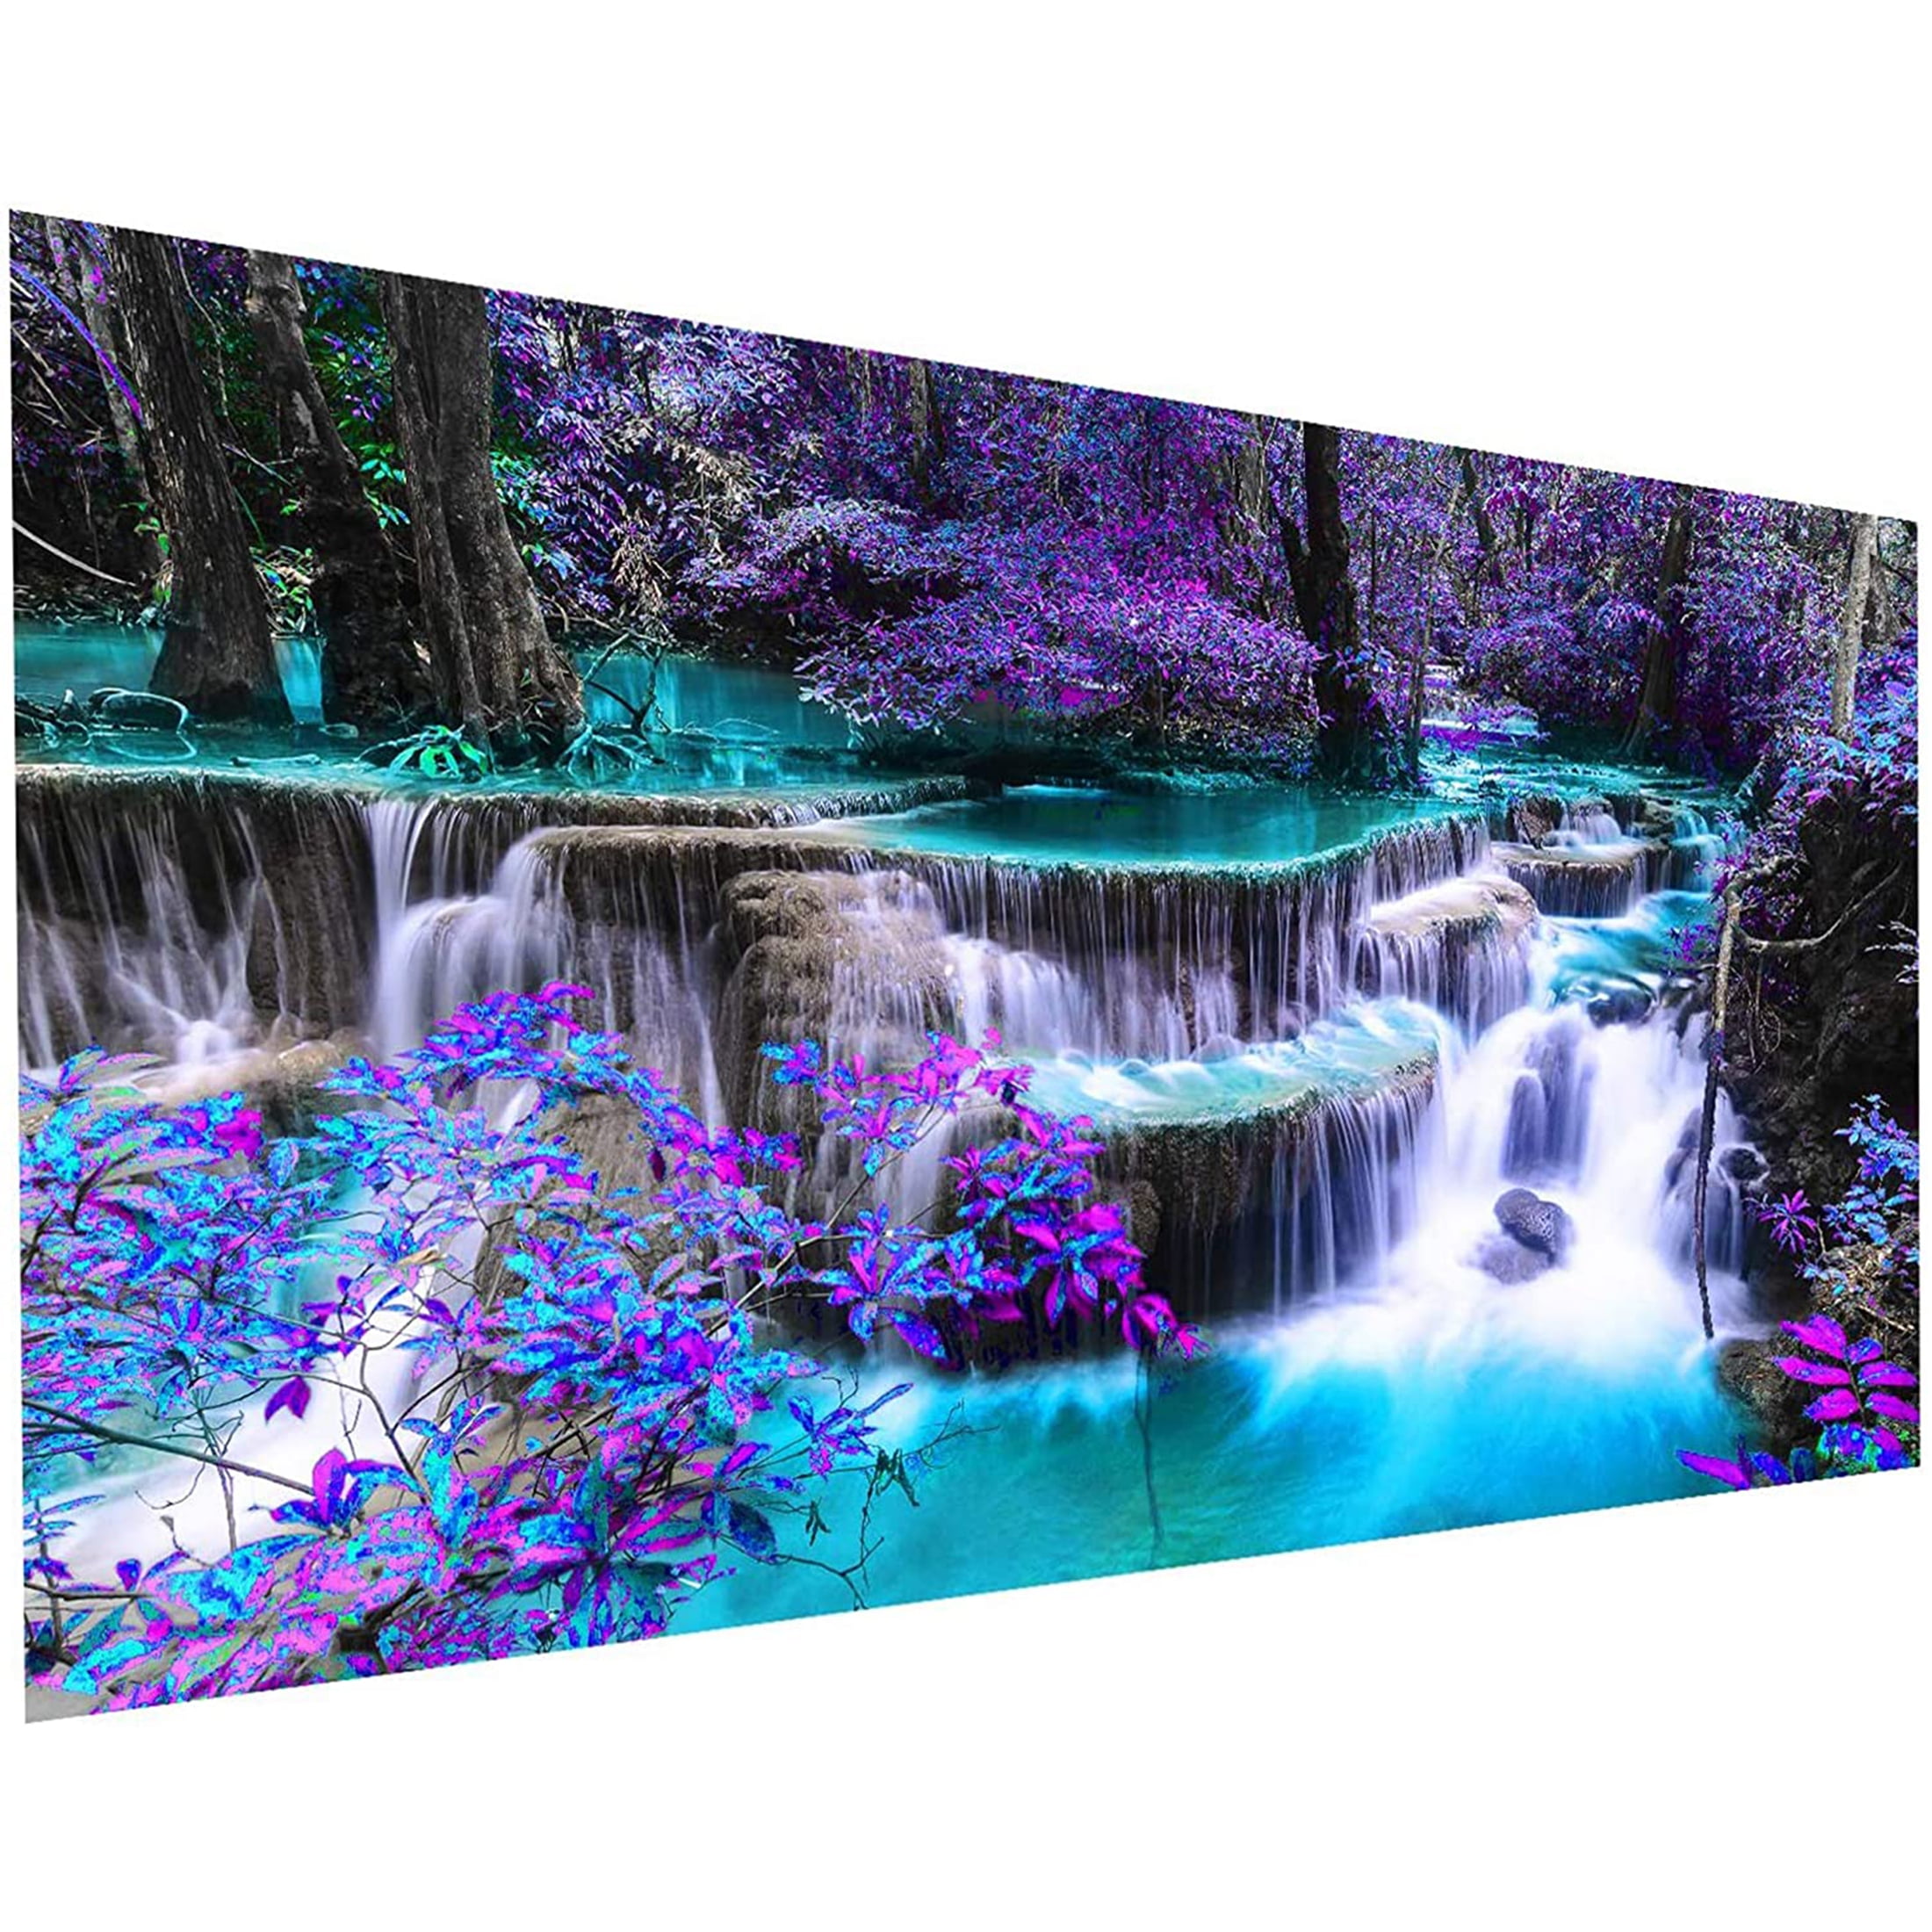 Mimik Lake View Diamond Painting,Paint by Diamonds for Adults, Diamond Art  with Accessories & Tools,Wall Decoration Crafts,Relaxation and Home Wall